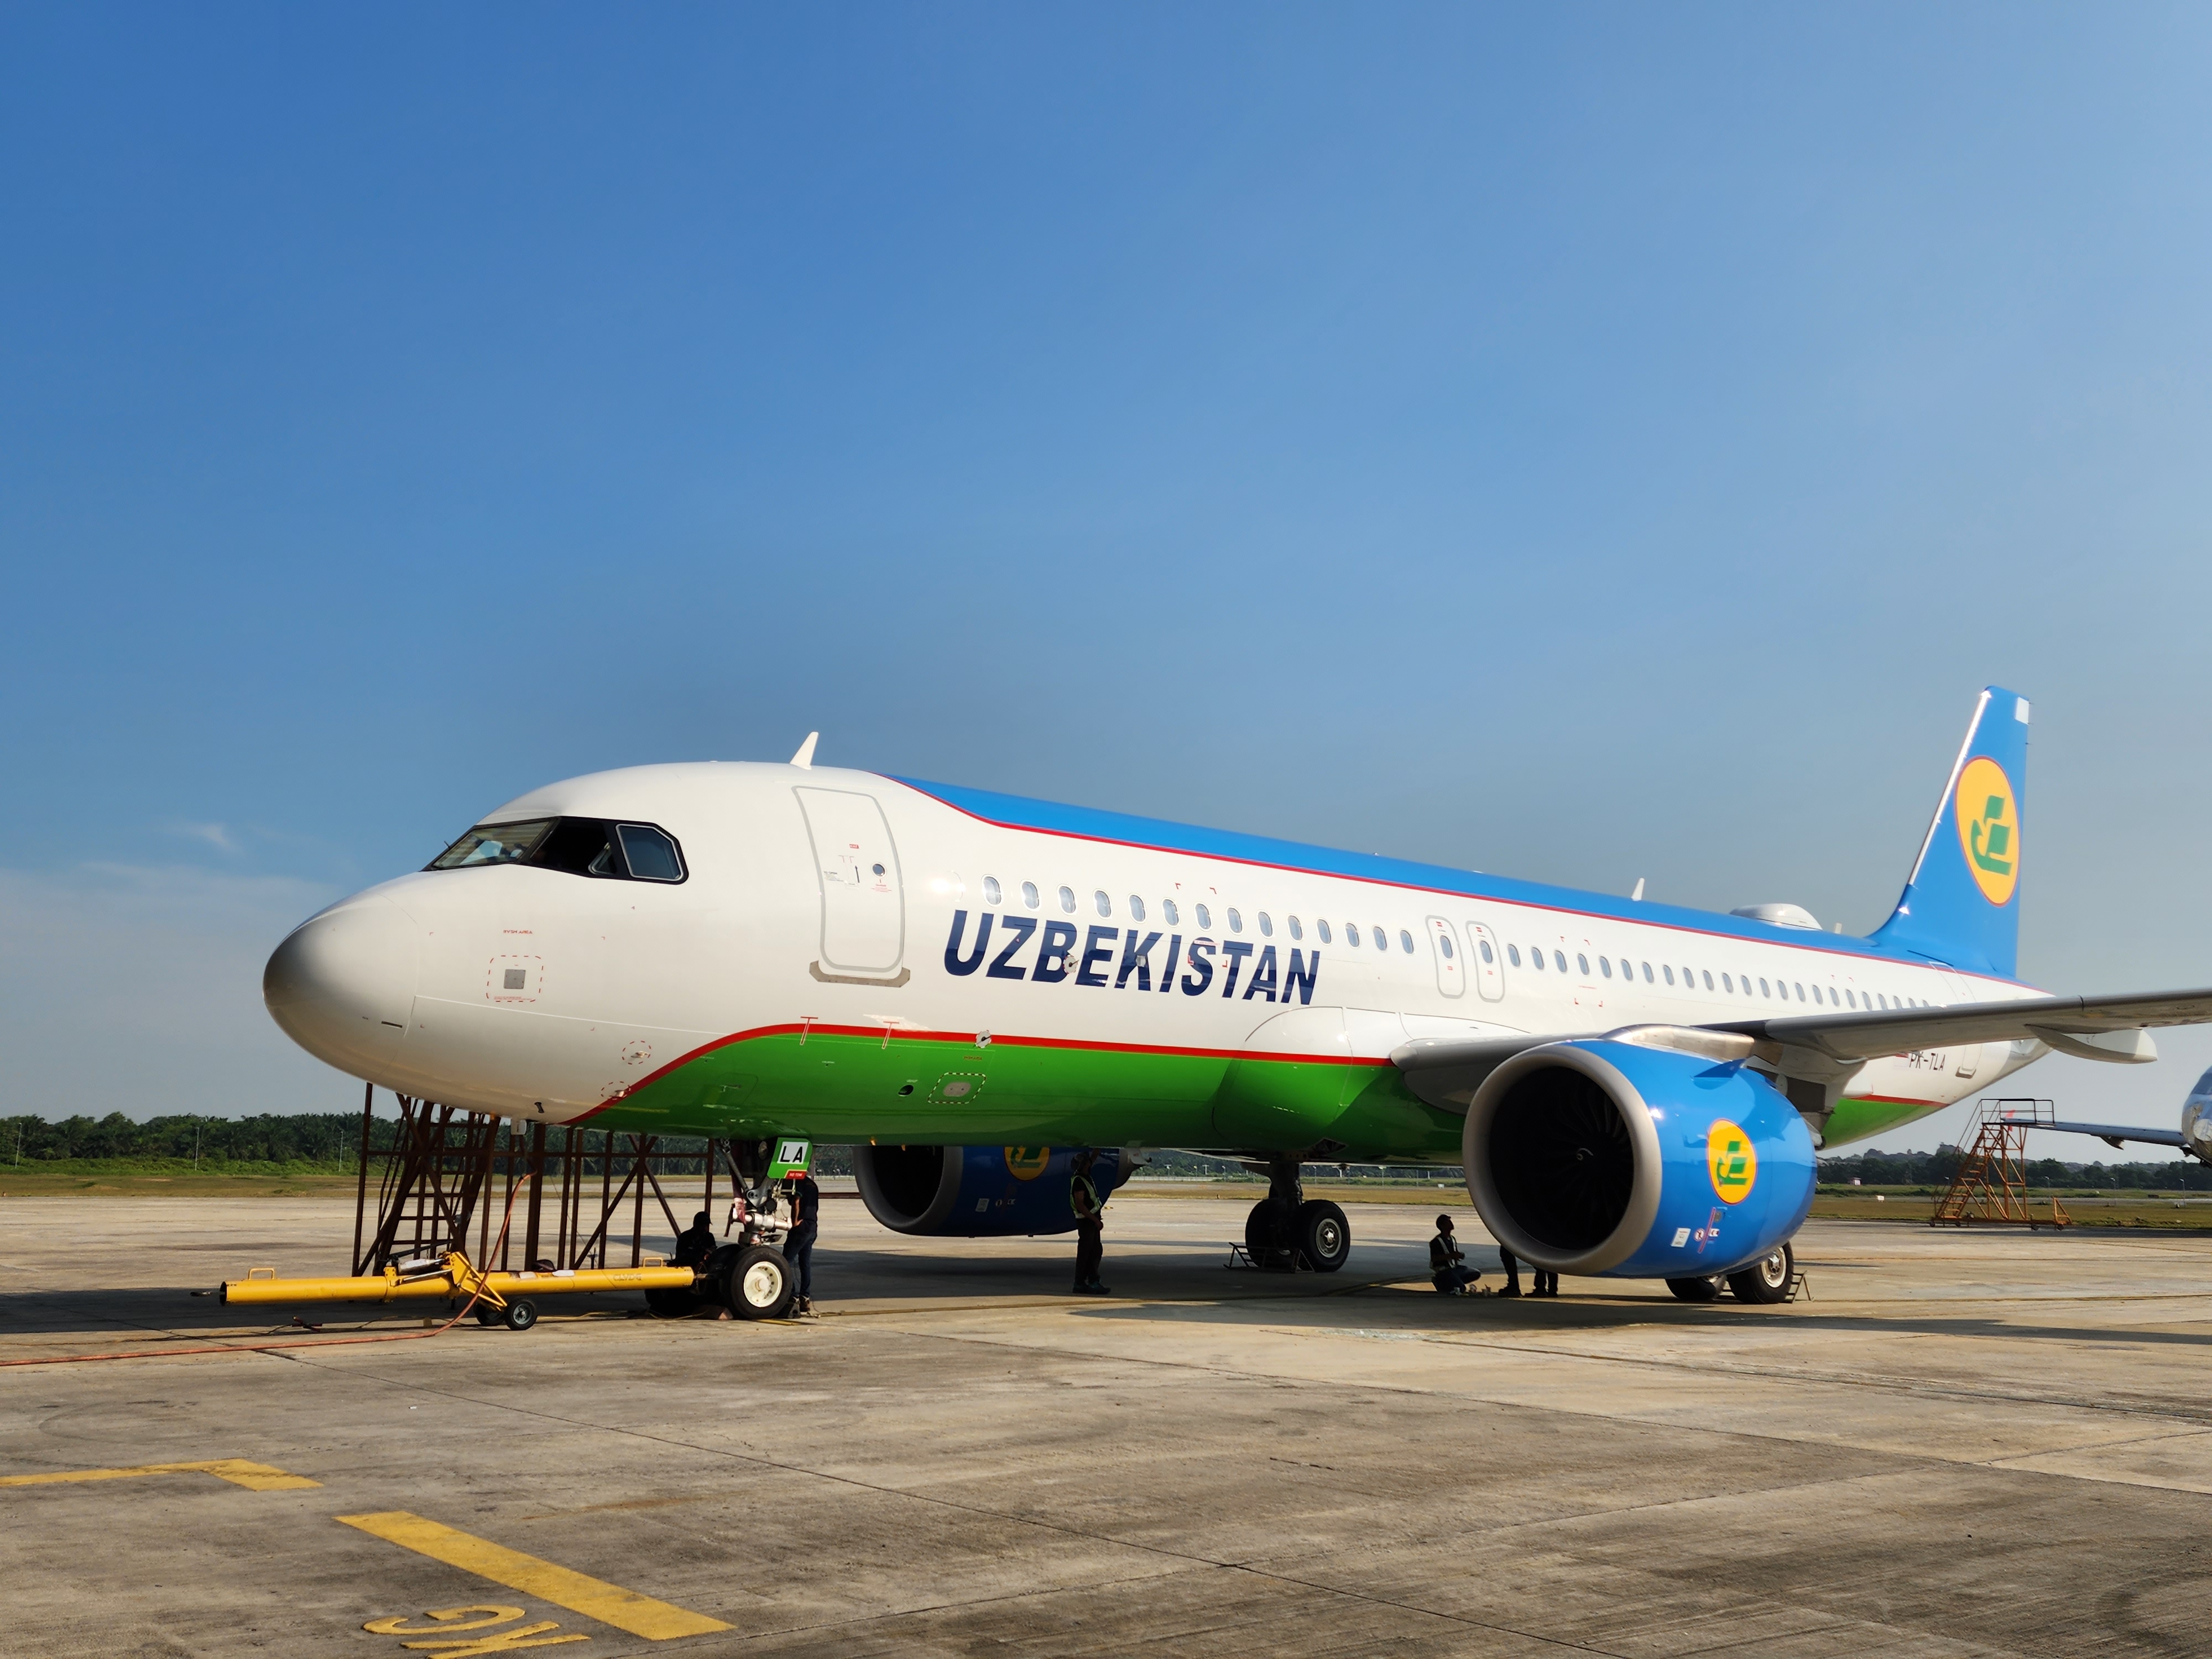 Painting the Skies of Uzbekistan Airlines